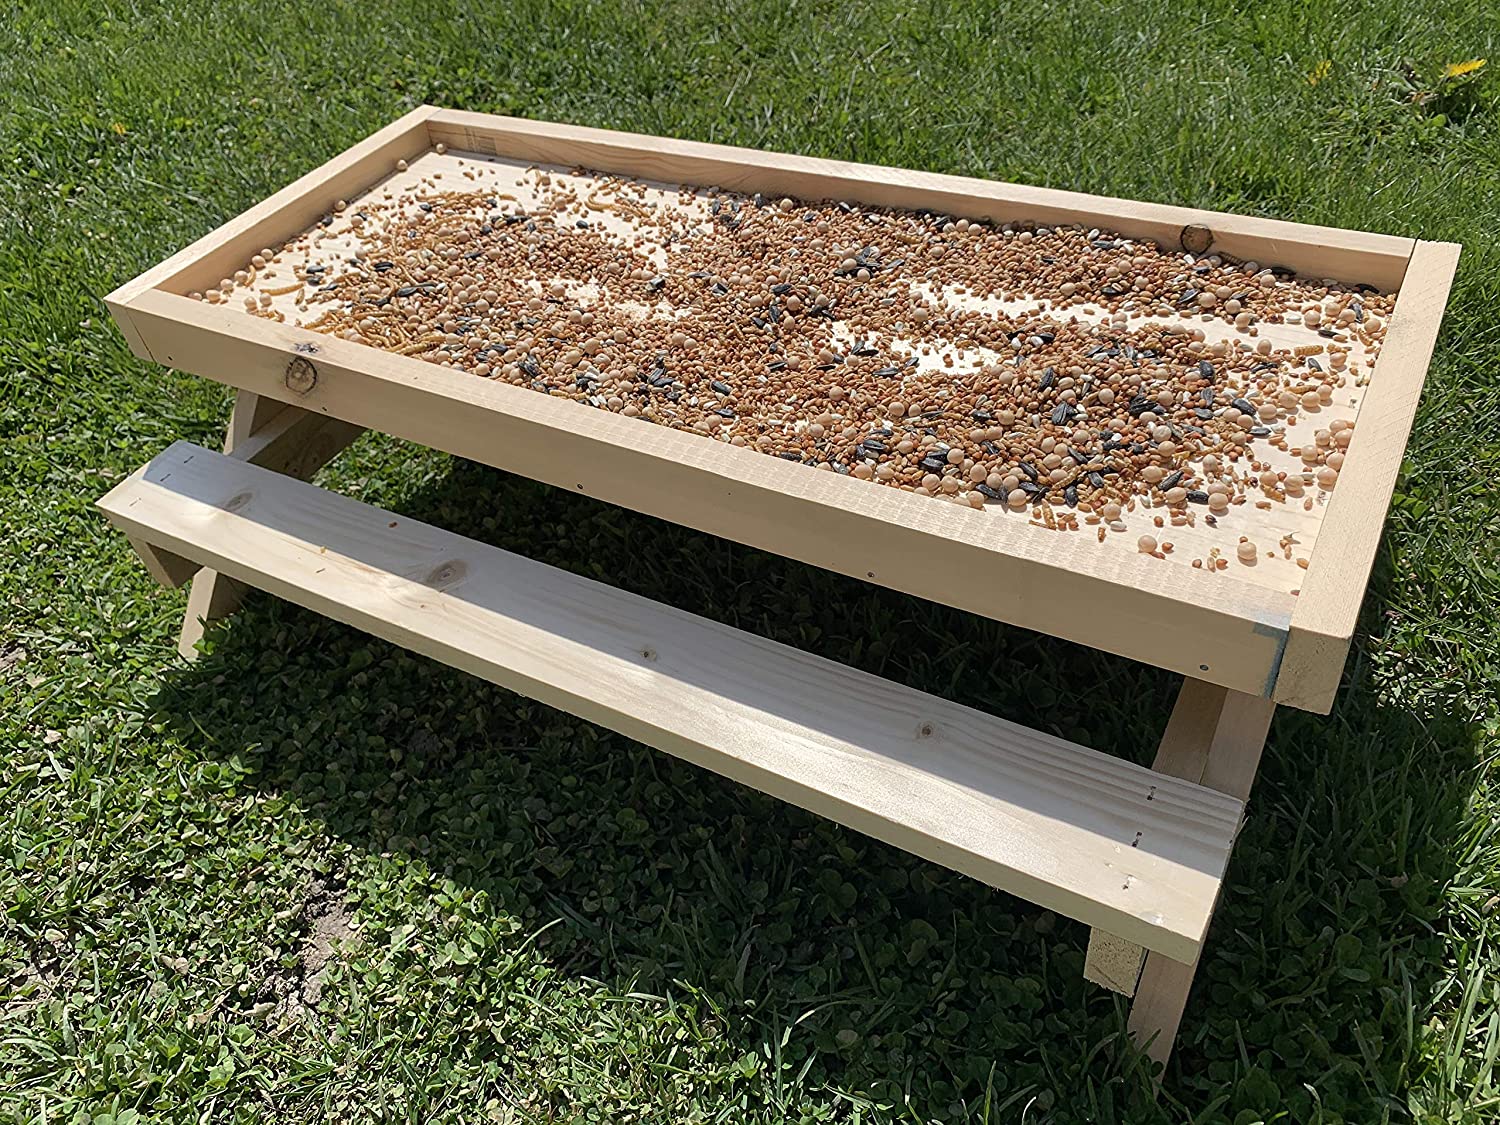 The Original Chicknic Table - Picnic Table for Chickens